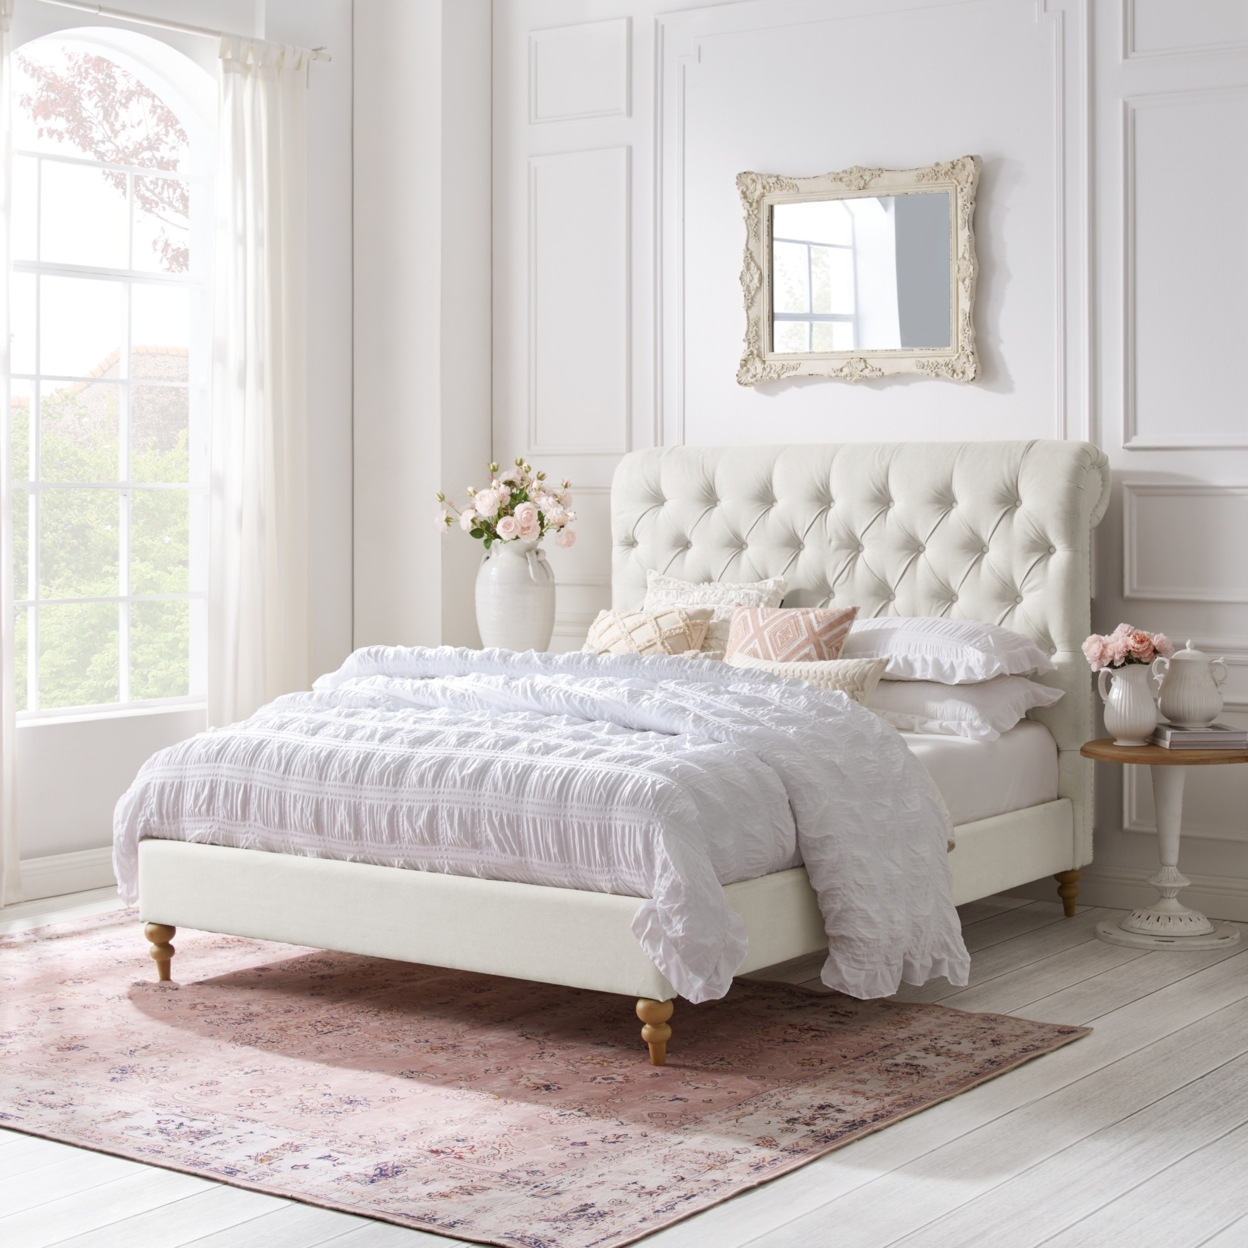 Kailynn Bed-Rolled Top Button Tufted-Nailhead Trim-Slats Included - Cream White, Twin